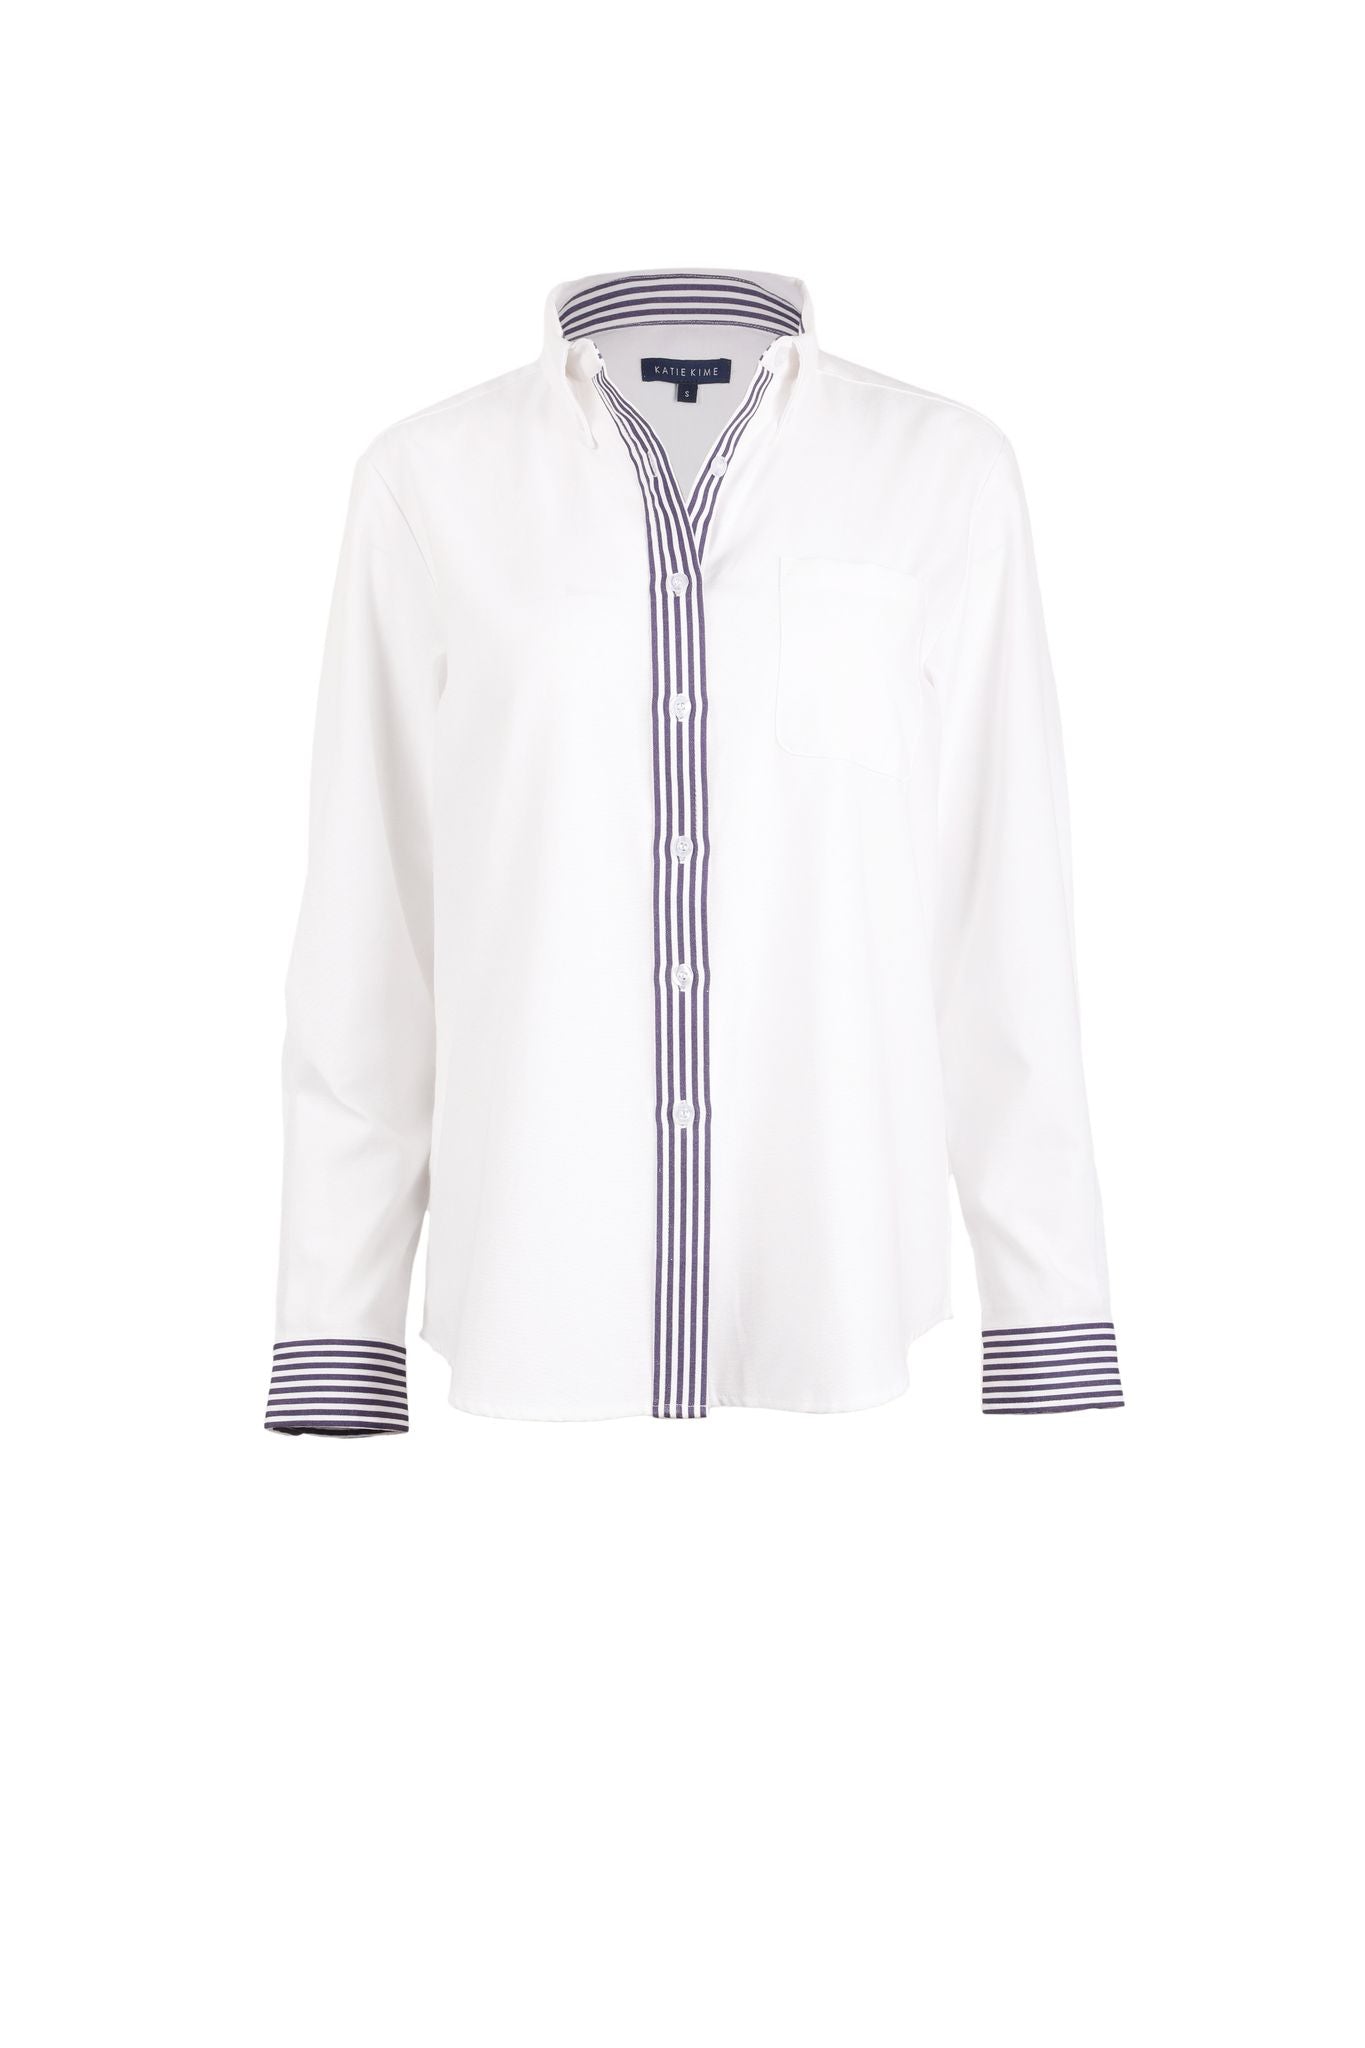 Top The Chelsea Button Down Katie Kime